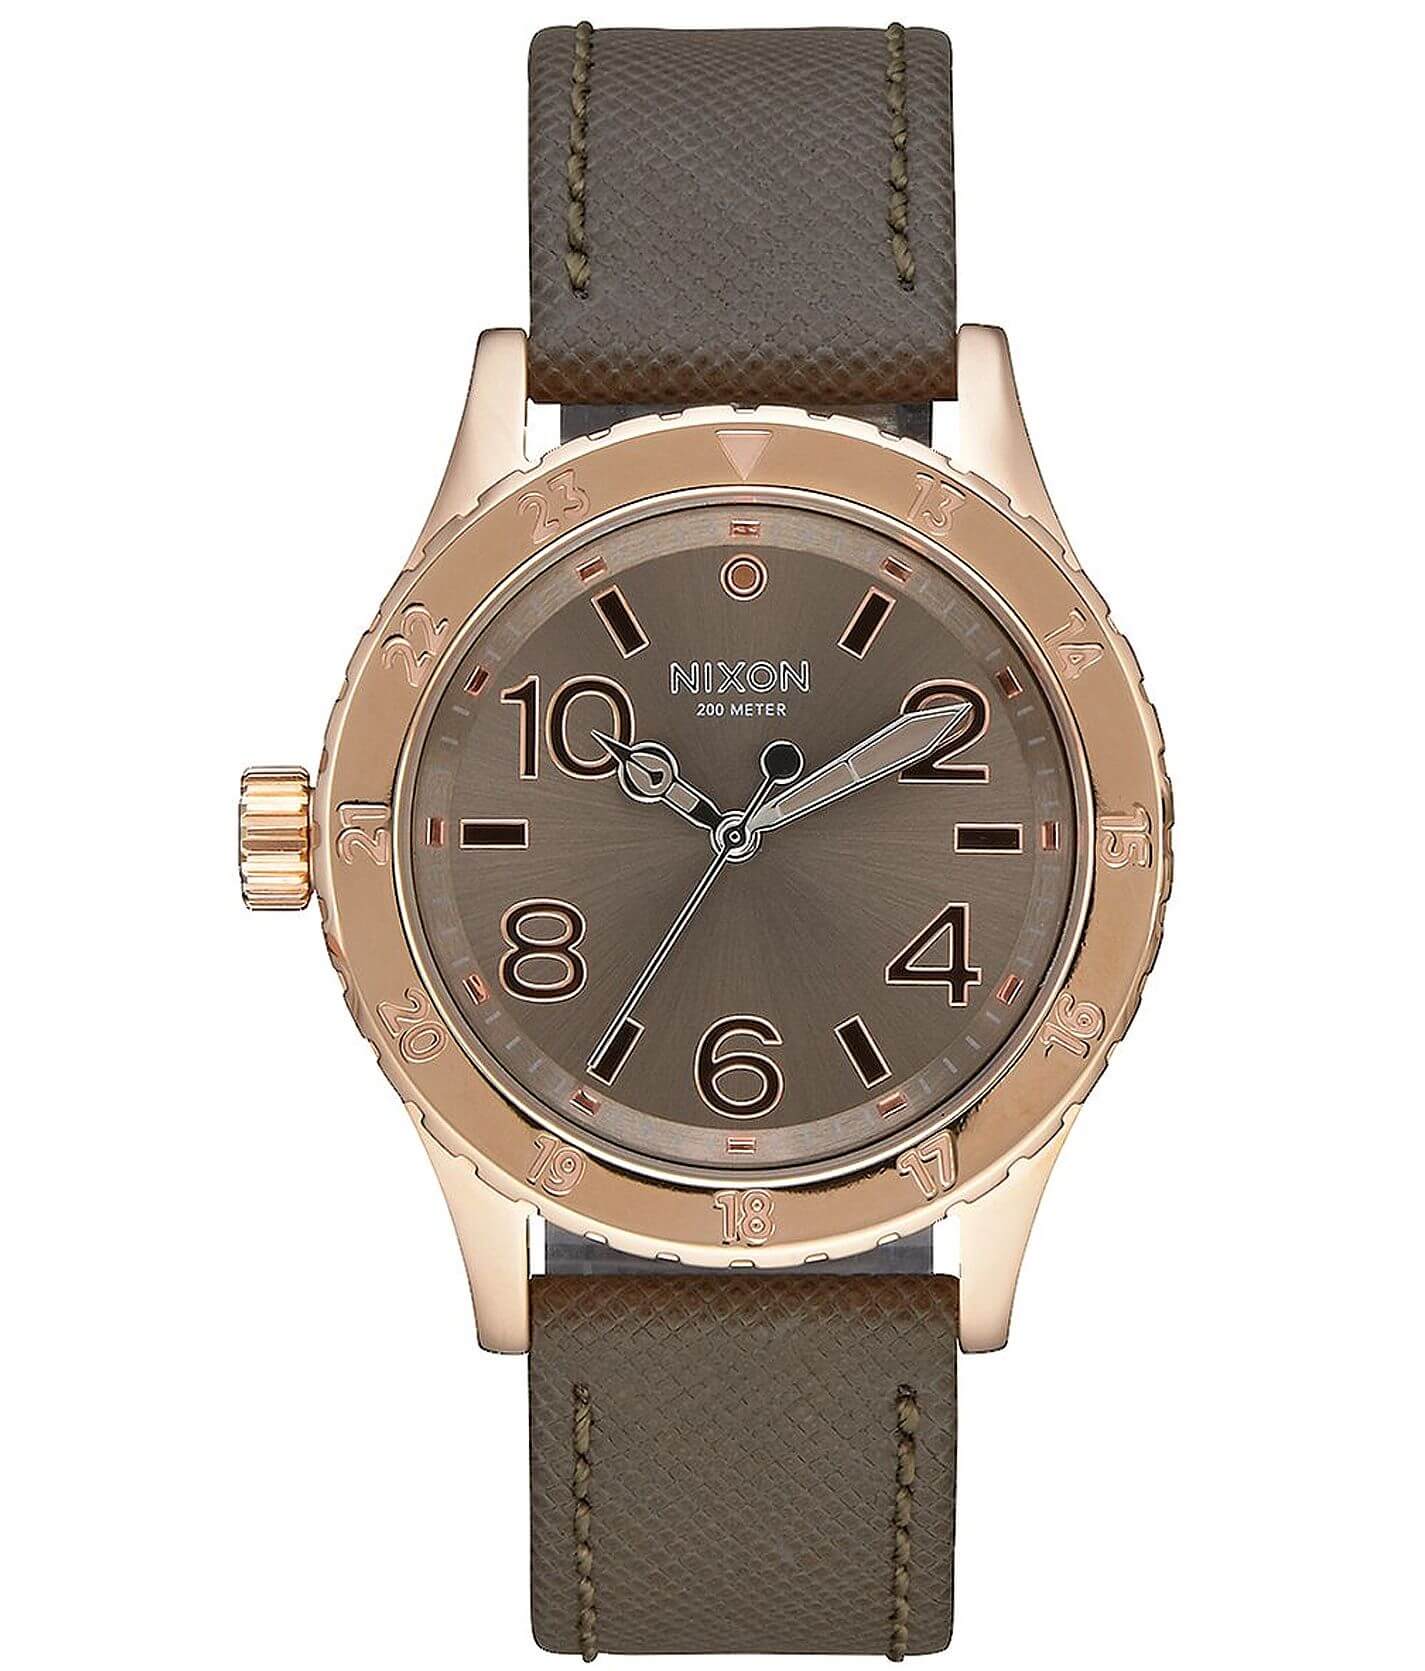 Nixon 38-20 Chrono Watch - Women's Watches in Rose Gold Taupe | Buckle